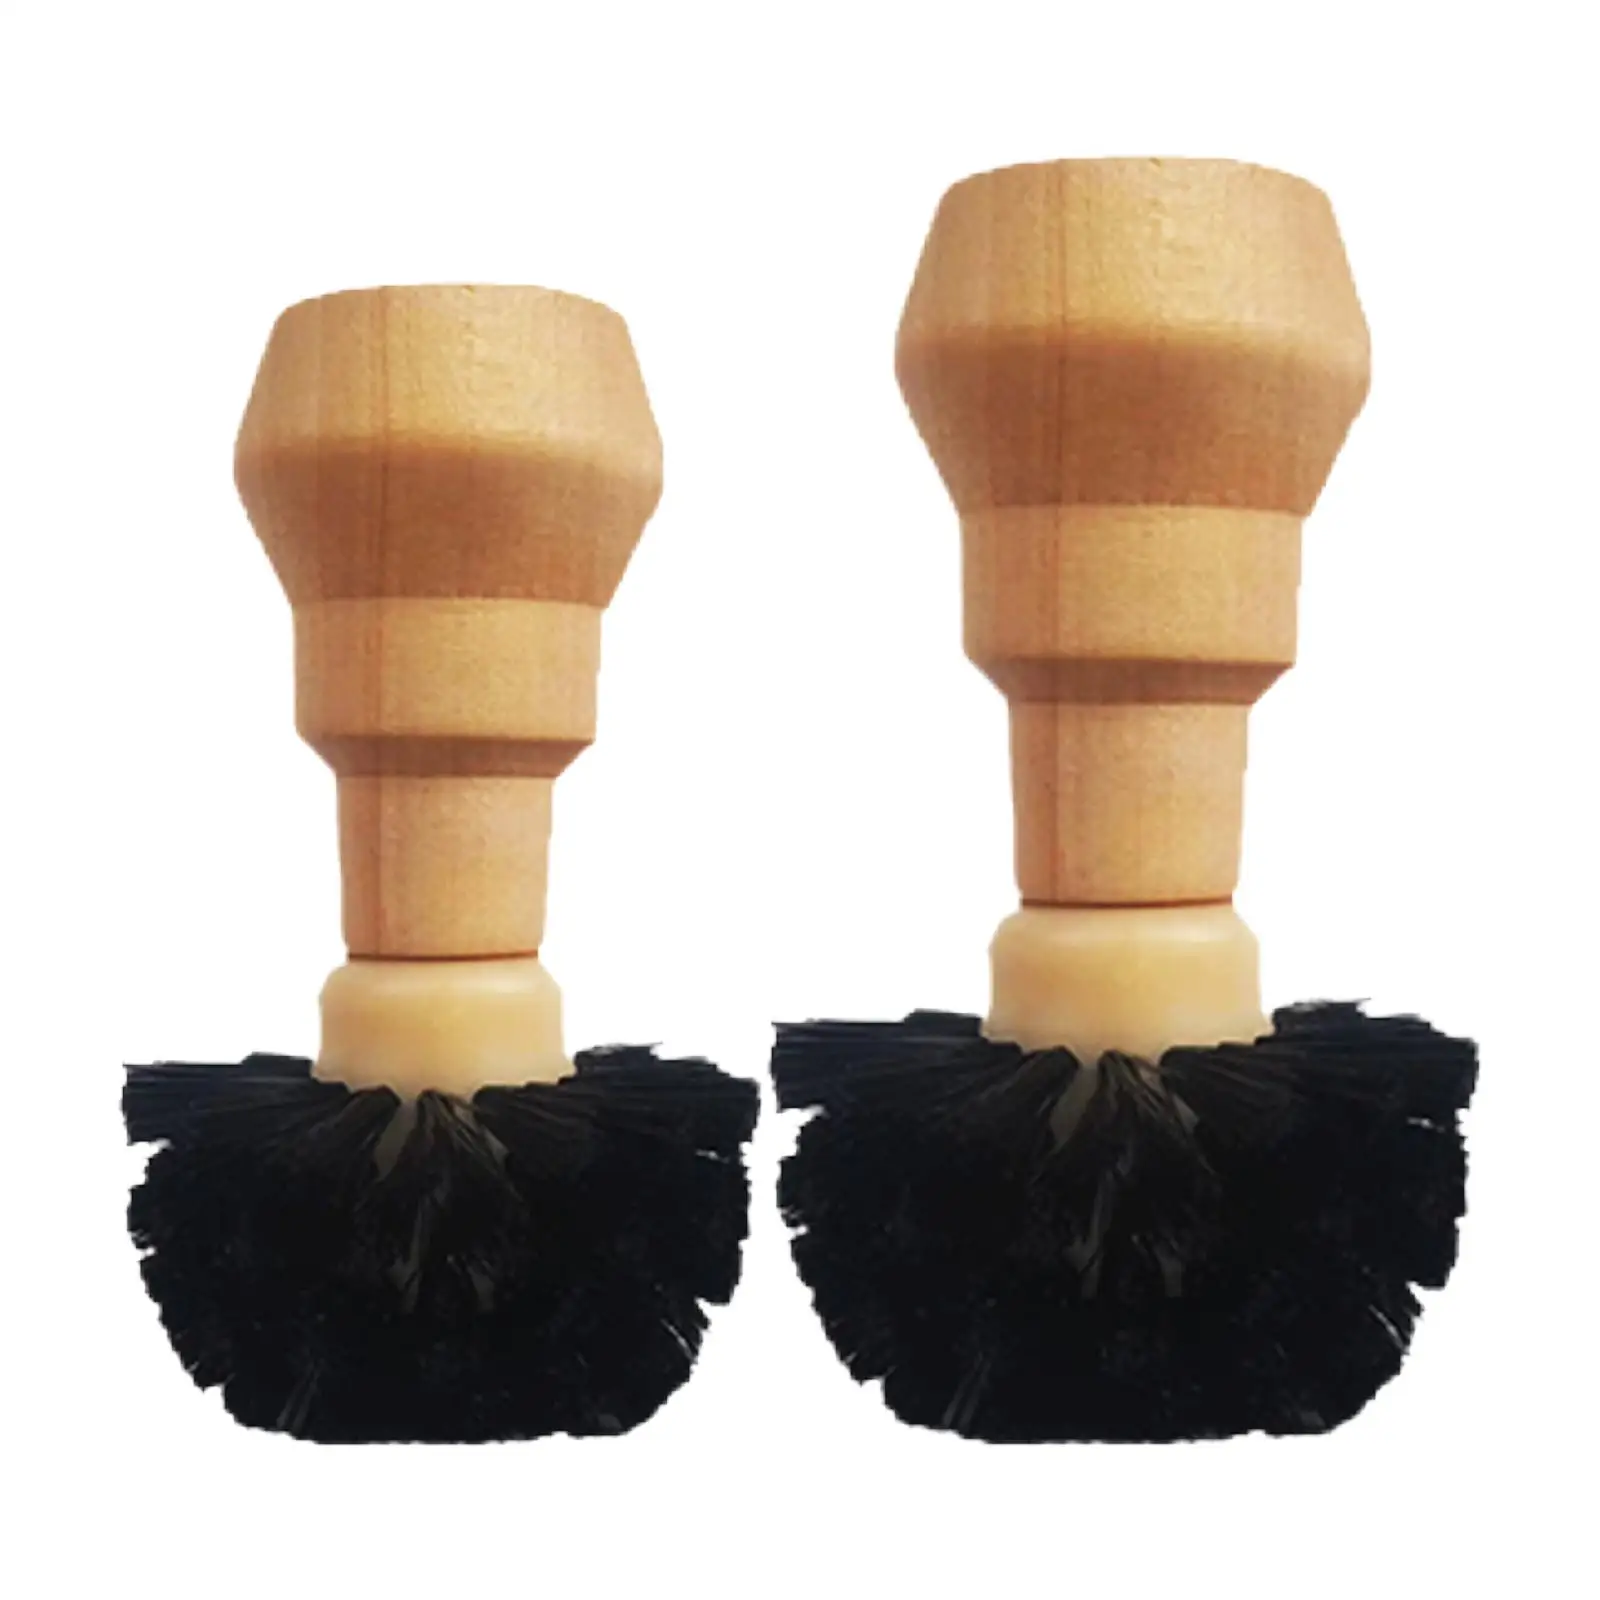 Protable Coffee Tamper Cleaning Brush Coffee Grinders Cleaning with Wooden Handle for Barista Portafilter Basket Home